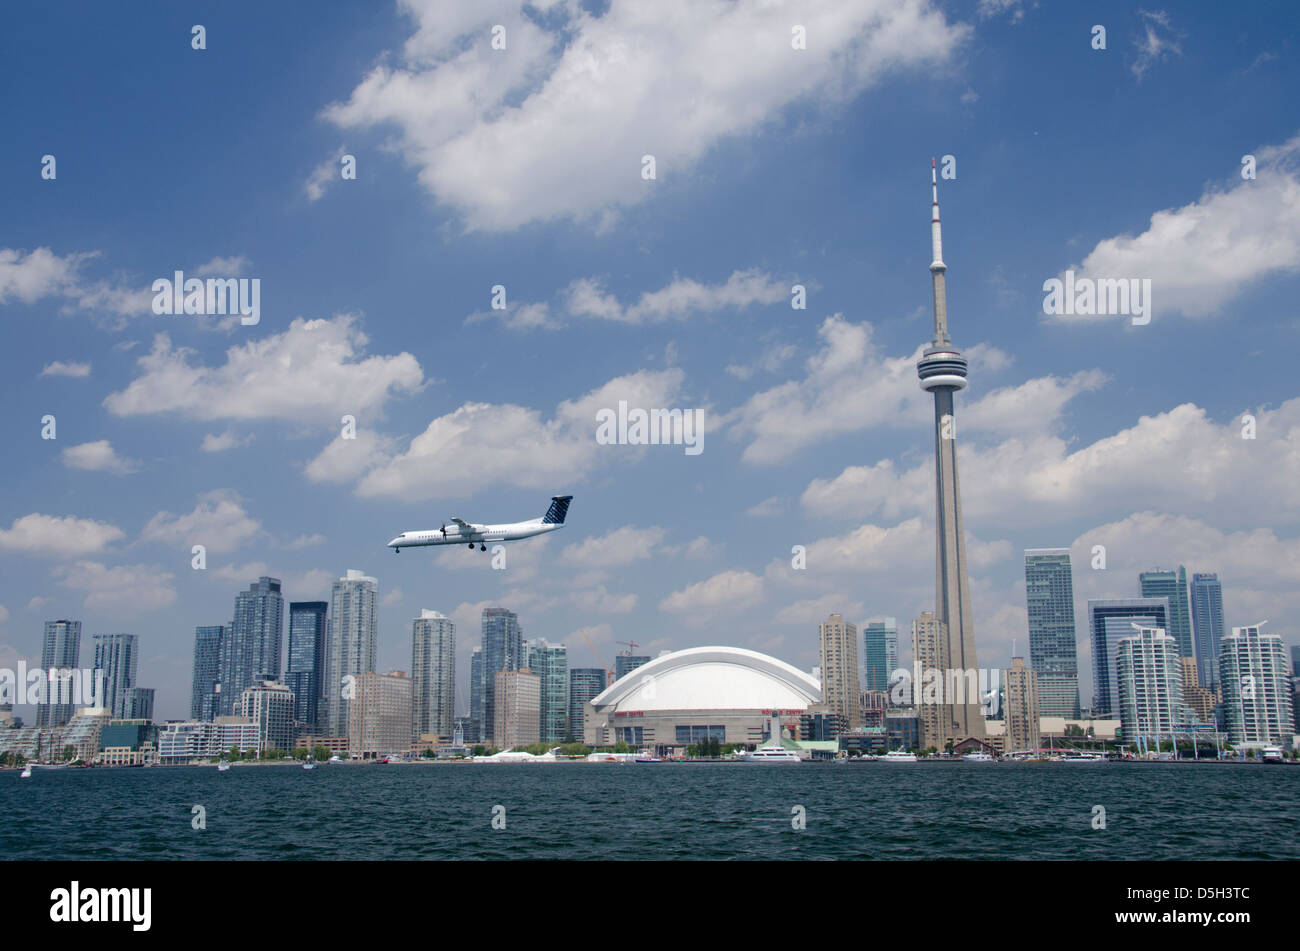 Canada, Ontario, Toronto. Lake Ontario city skyline view of the iconic CN Tower and the Rogers Centre. Porter airplane. Stock Photo